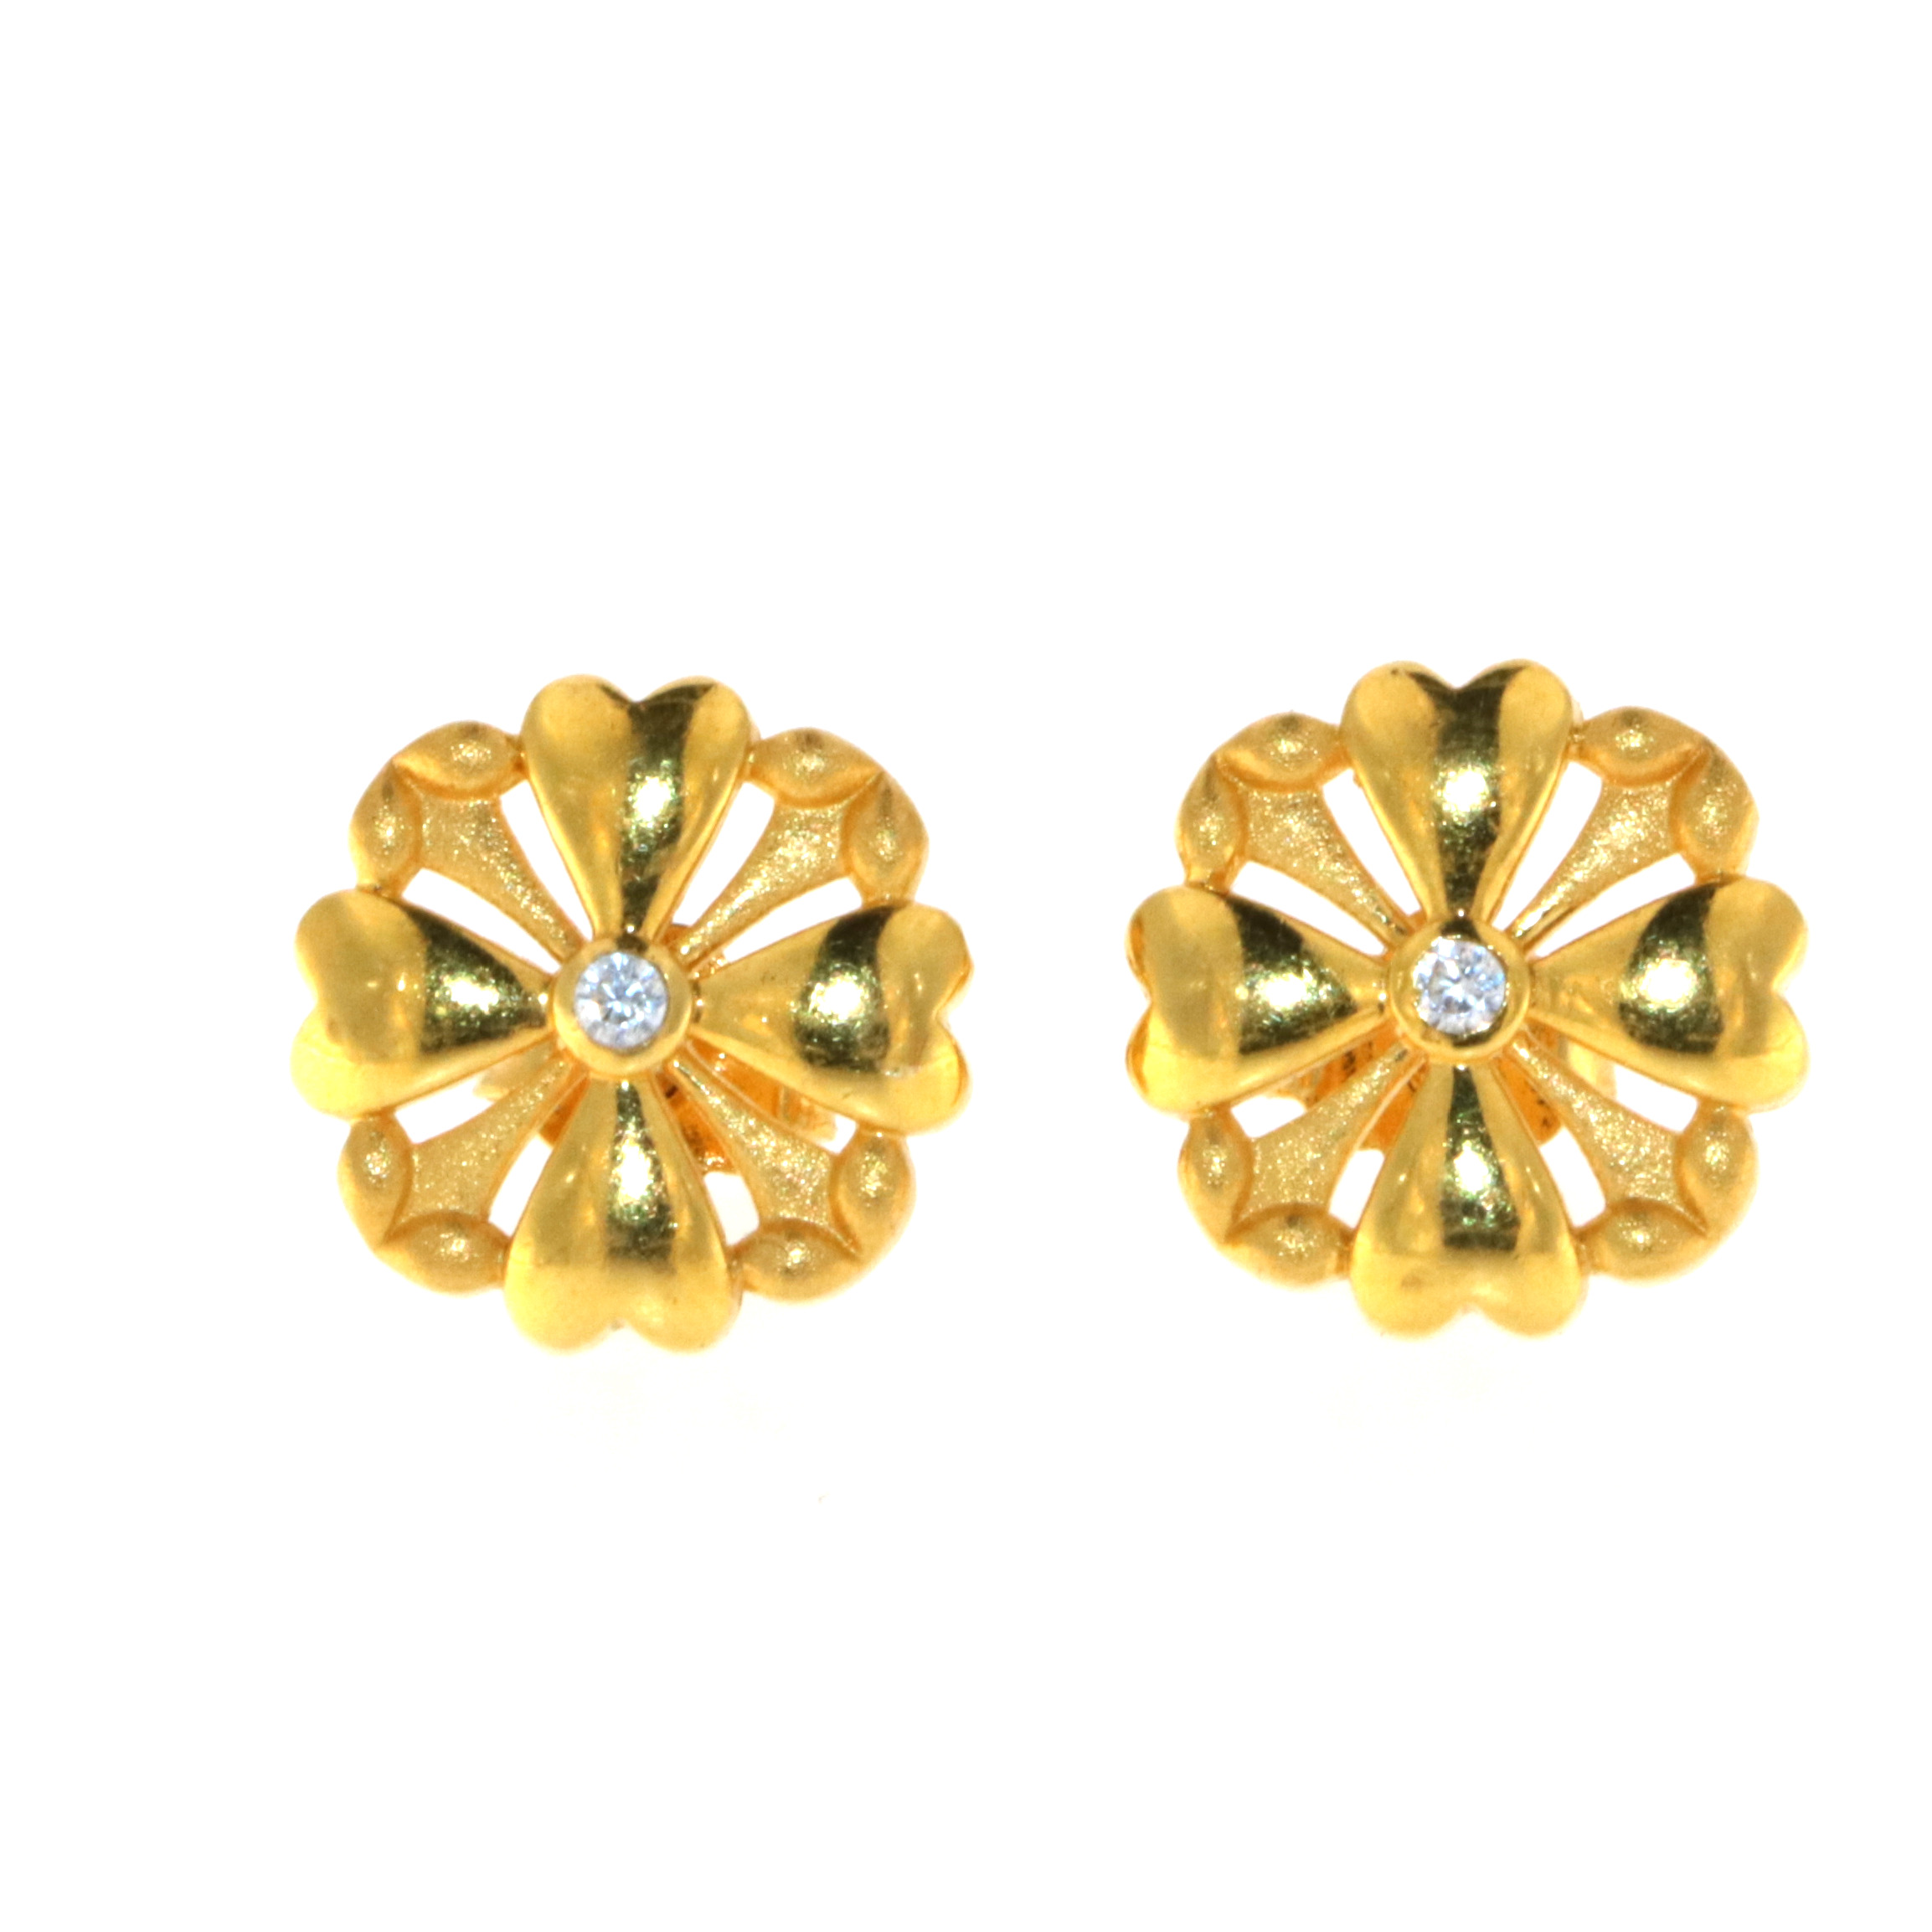 22ct Real Gold Asian/Indian/Pakistani Style Heart Stud Earrings